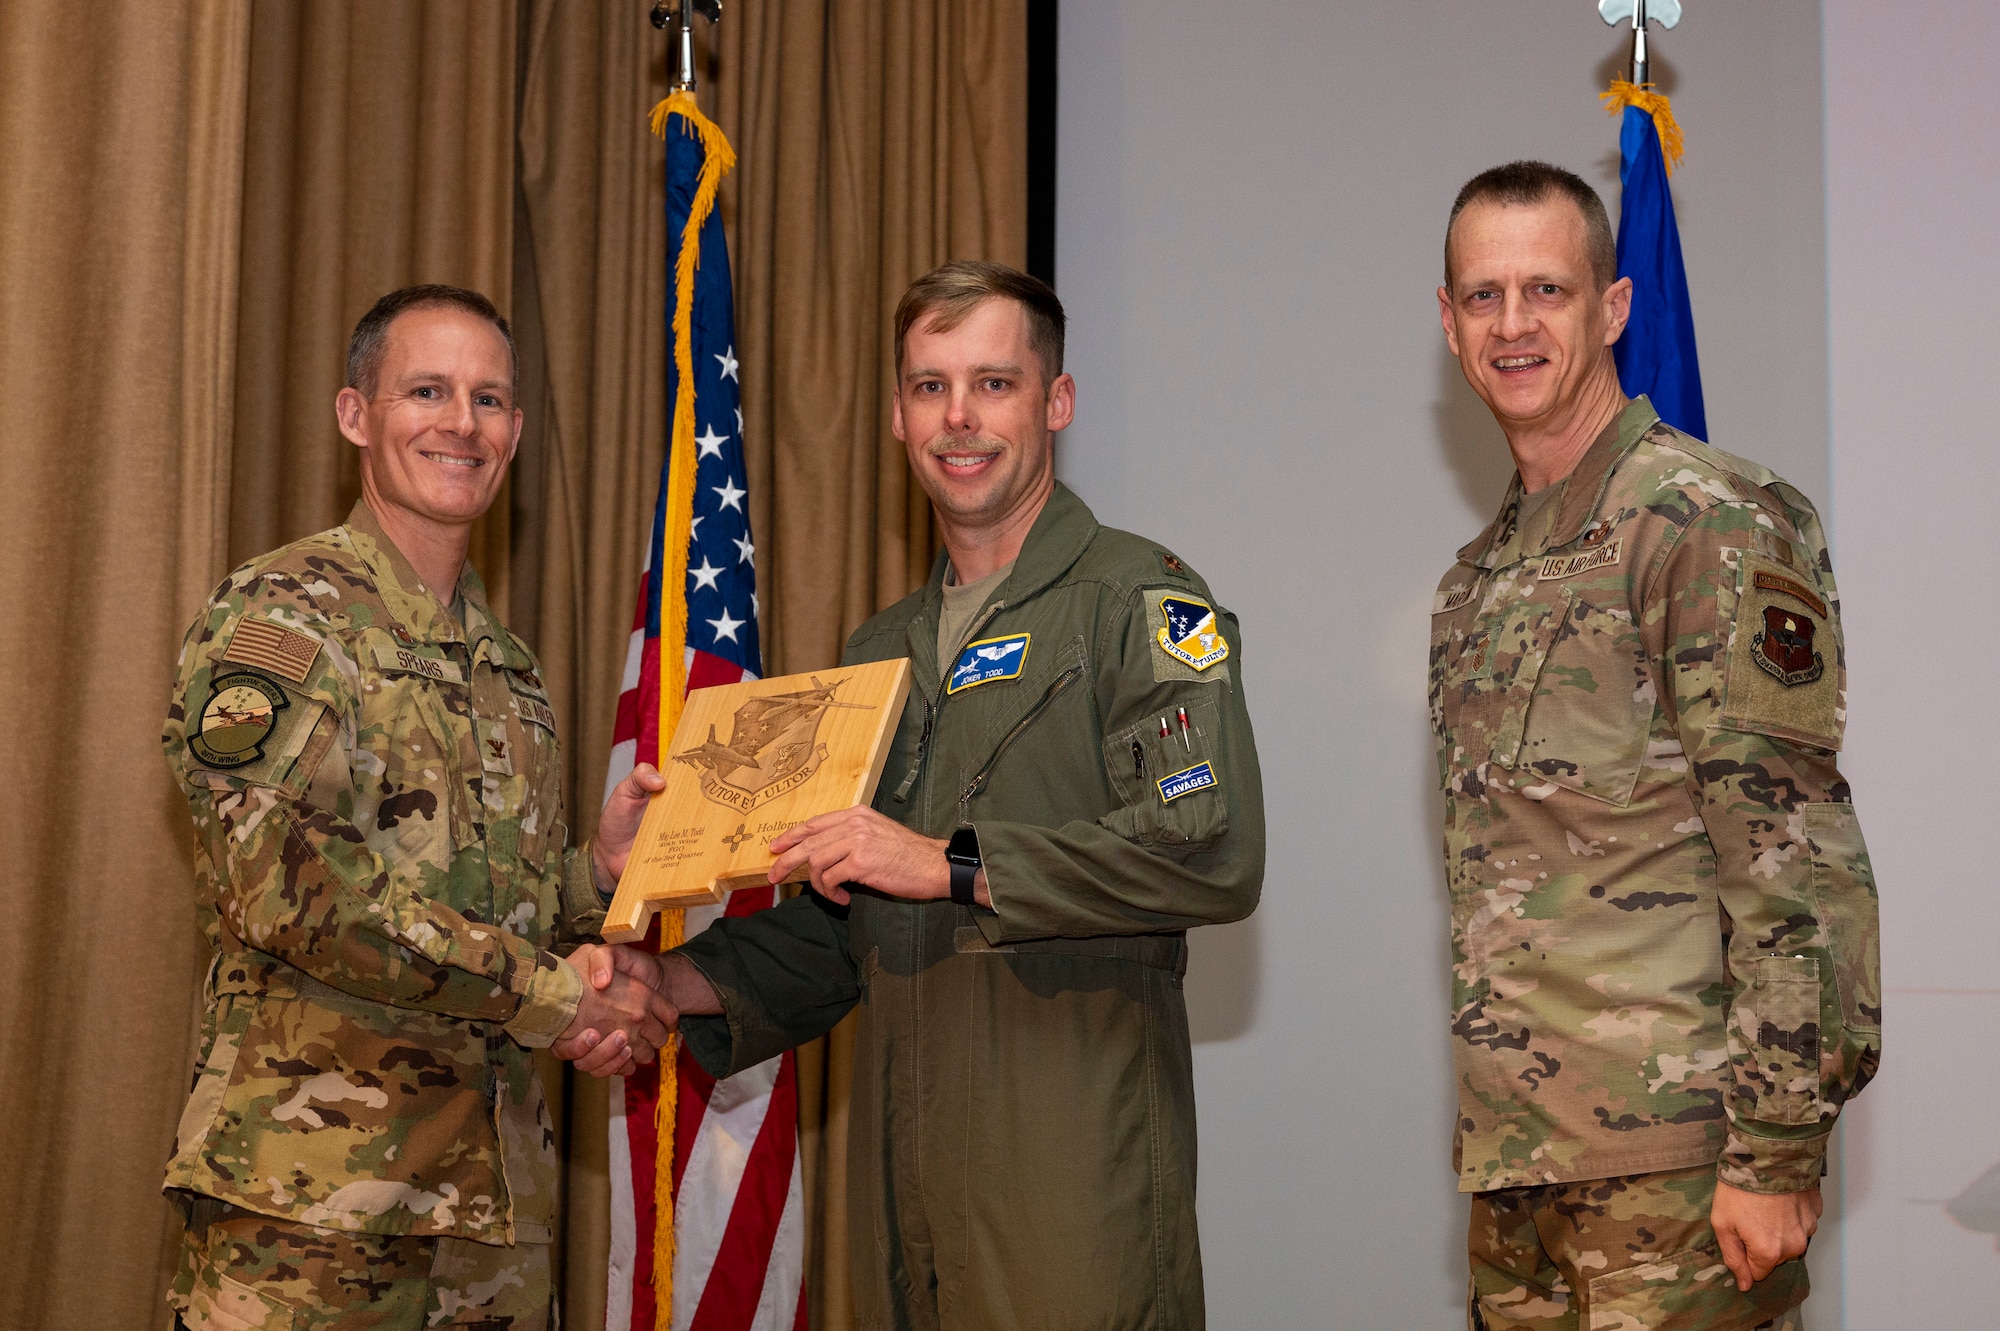 U.S. Air Force Maj. Lee Todd, from the 16th Training Squadron, accepts the Field Grade Officer of the Quarter Award, during the 49th Wing’s 3rd Quarter Award  ceremony at Holloman Air Force Base, New Mexico, Nov. 21, 2022.